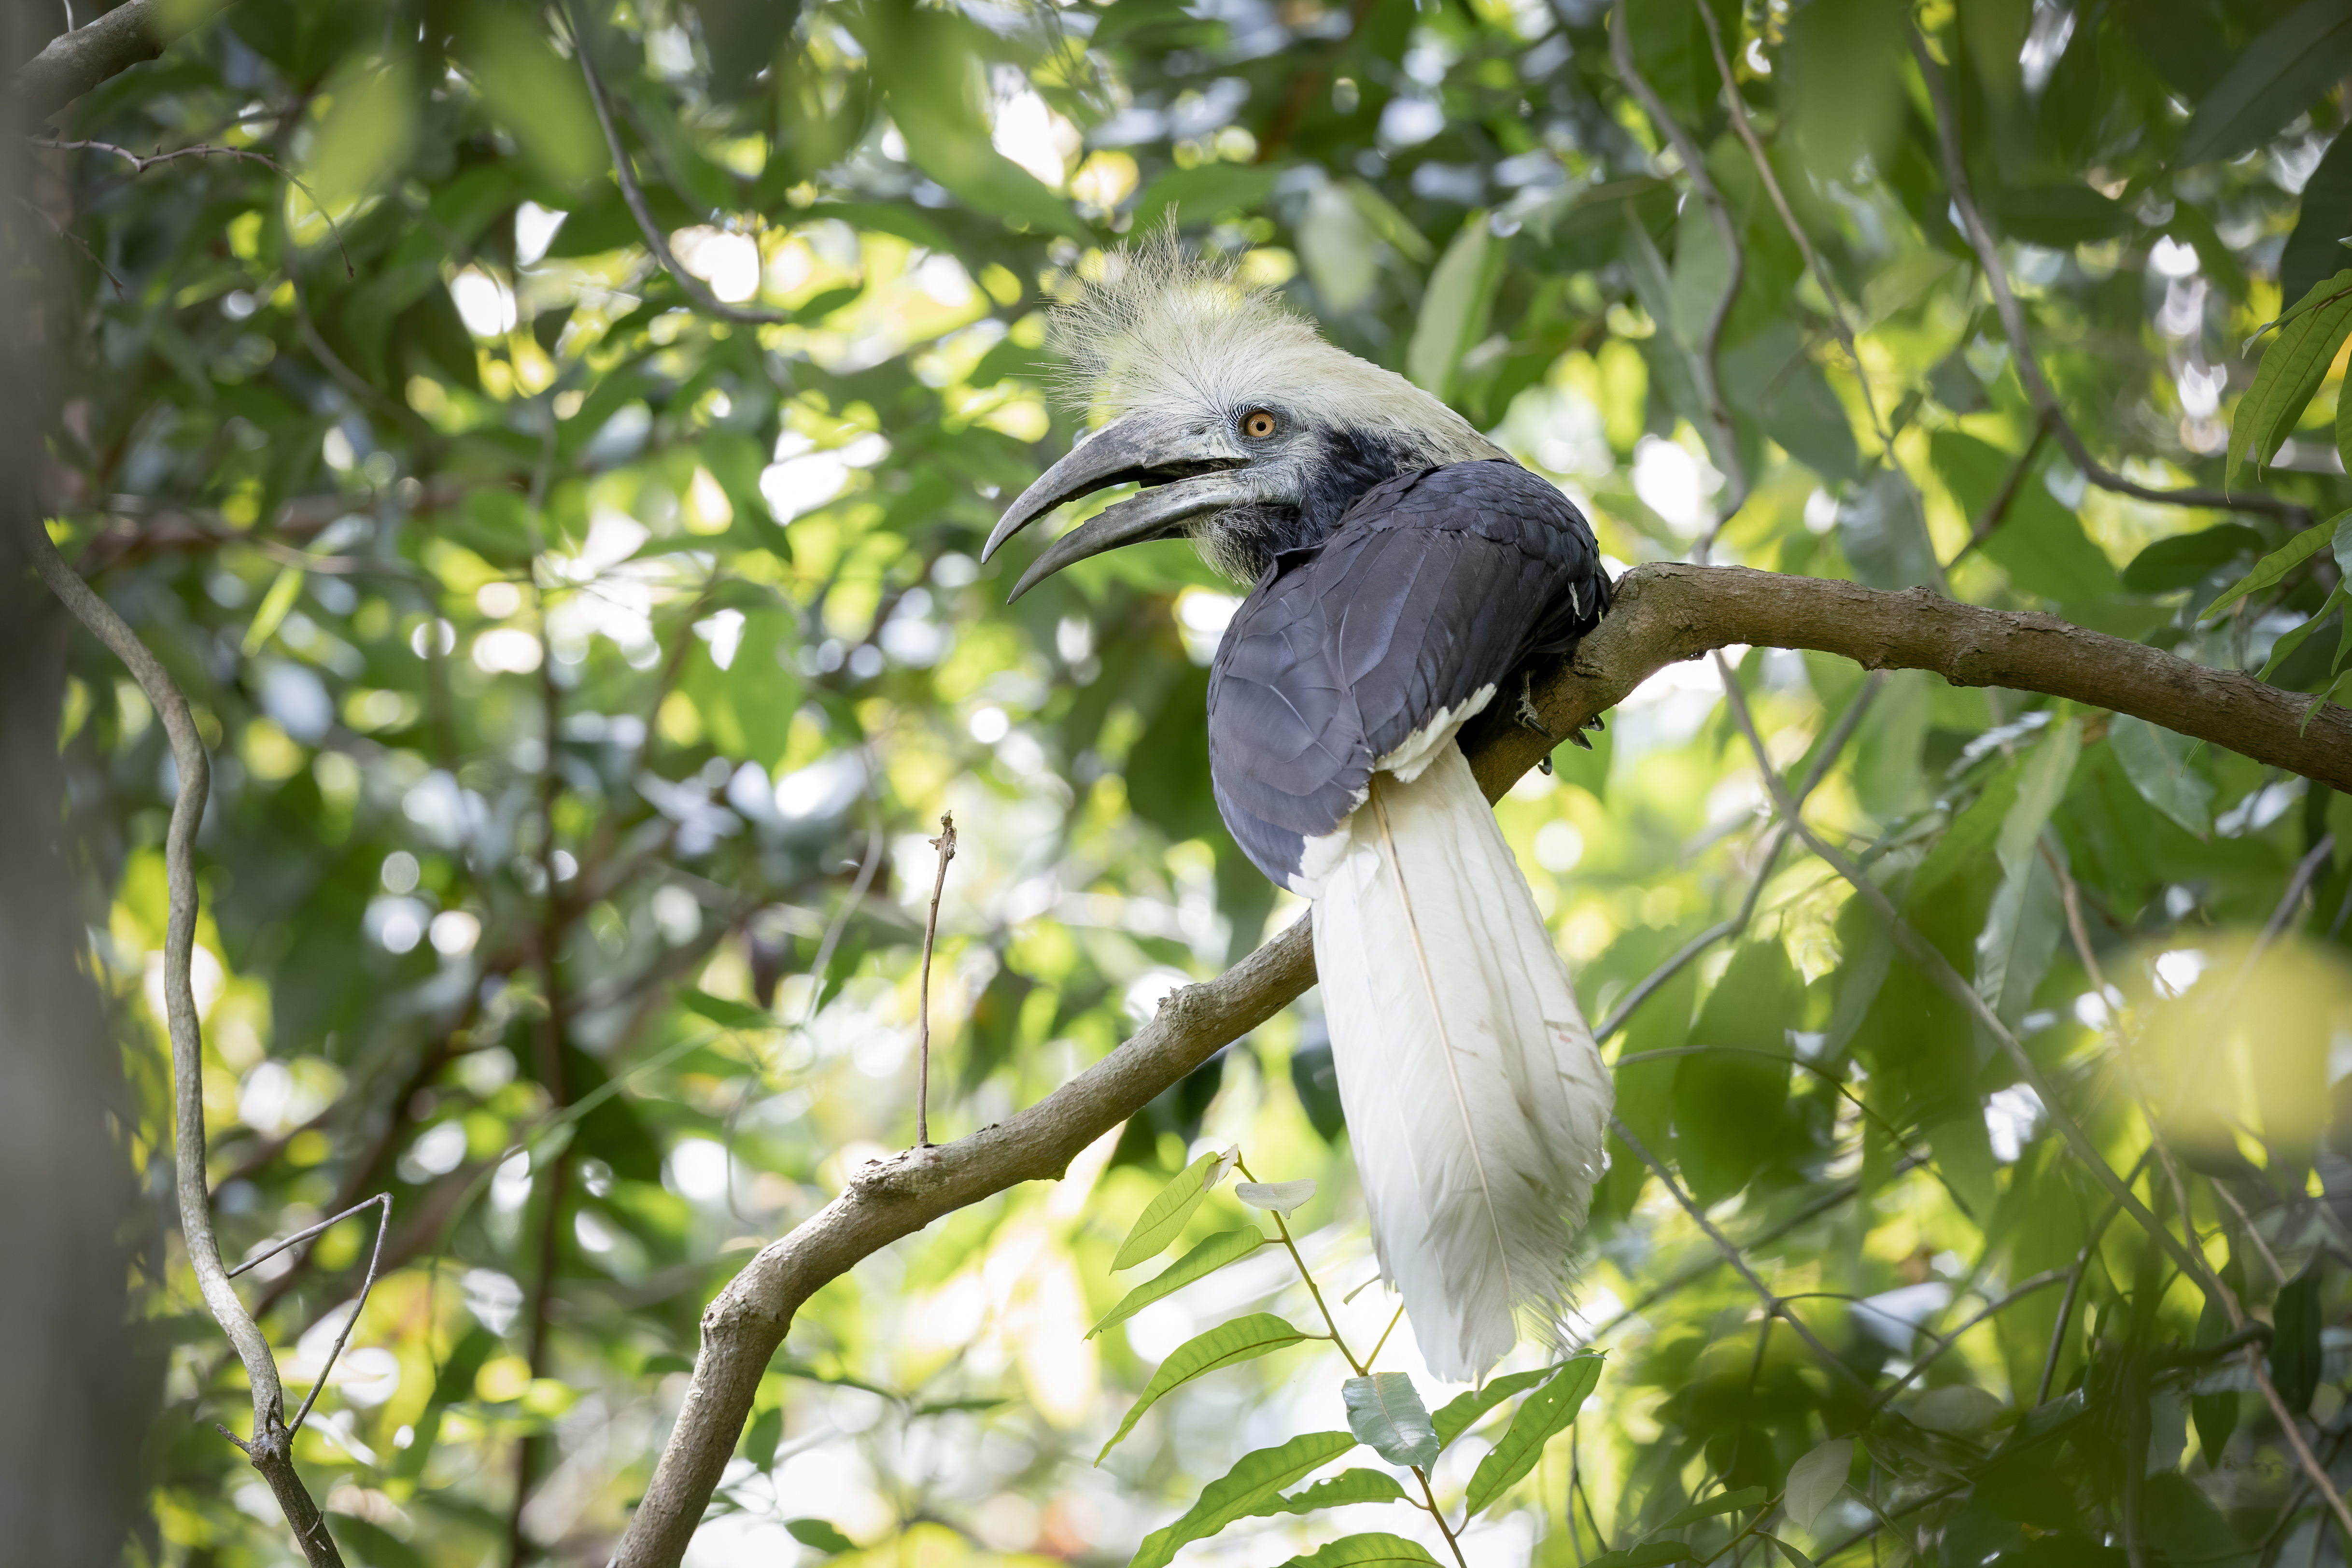 White-crowned Hornbill at Pulau Ubin on 22 Apr 2023. Photo credit: Adrian Silas Tay